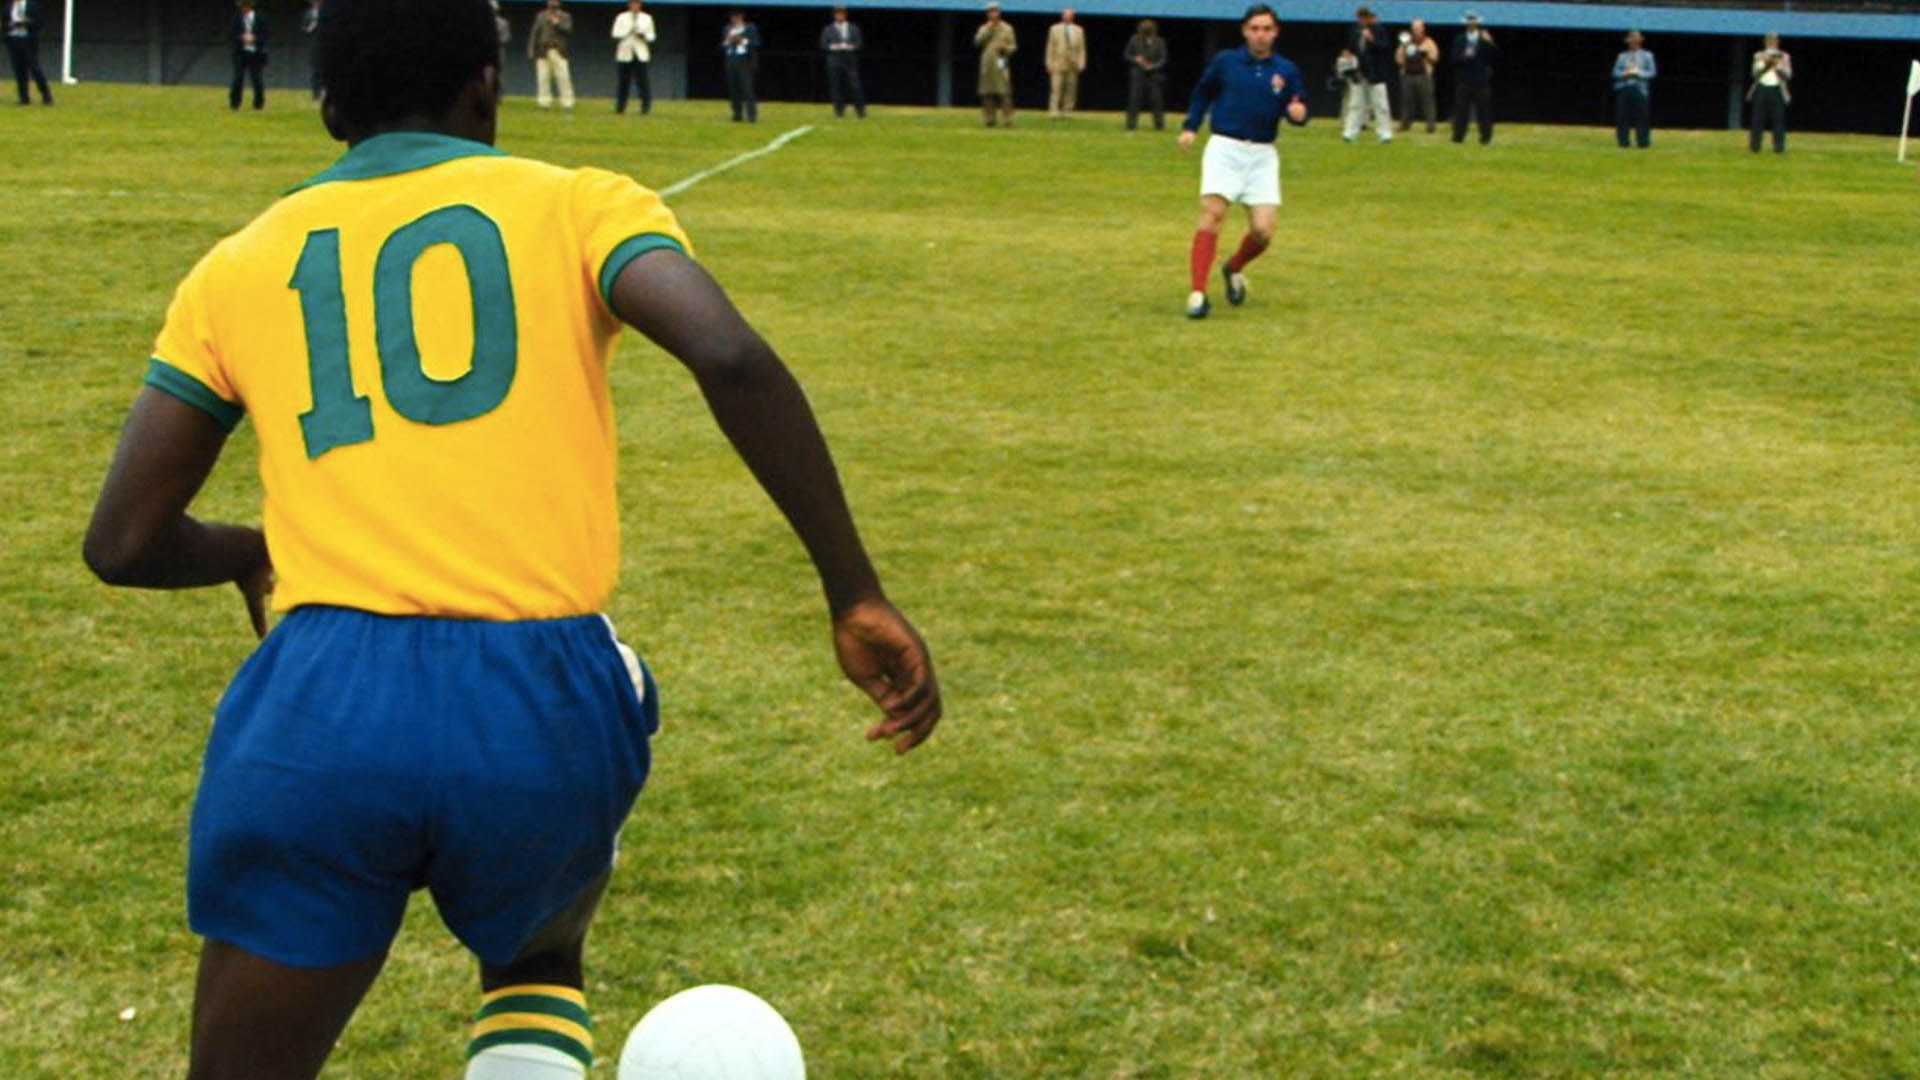 An image of Pele's character in the movie Pelé: Birth of a Legend